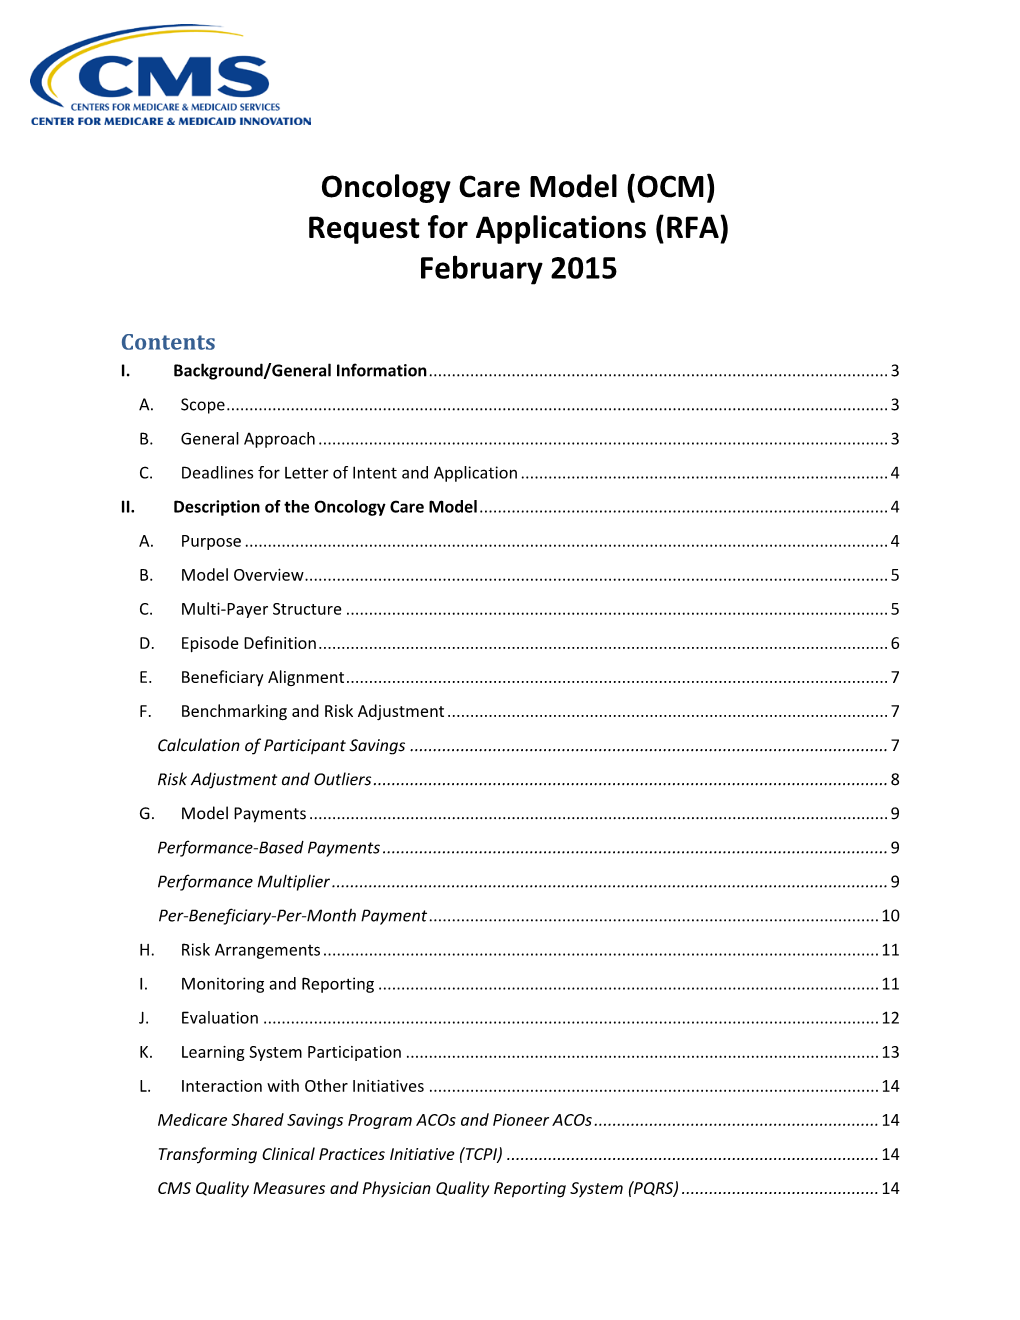 Oncology Care Model (OCM) Request for Applications (RFA) February 2015